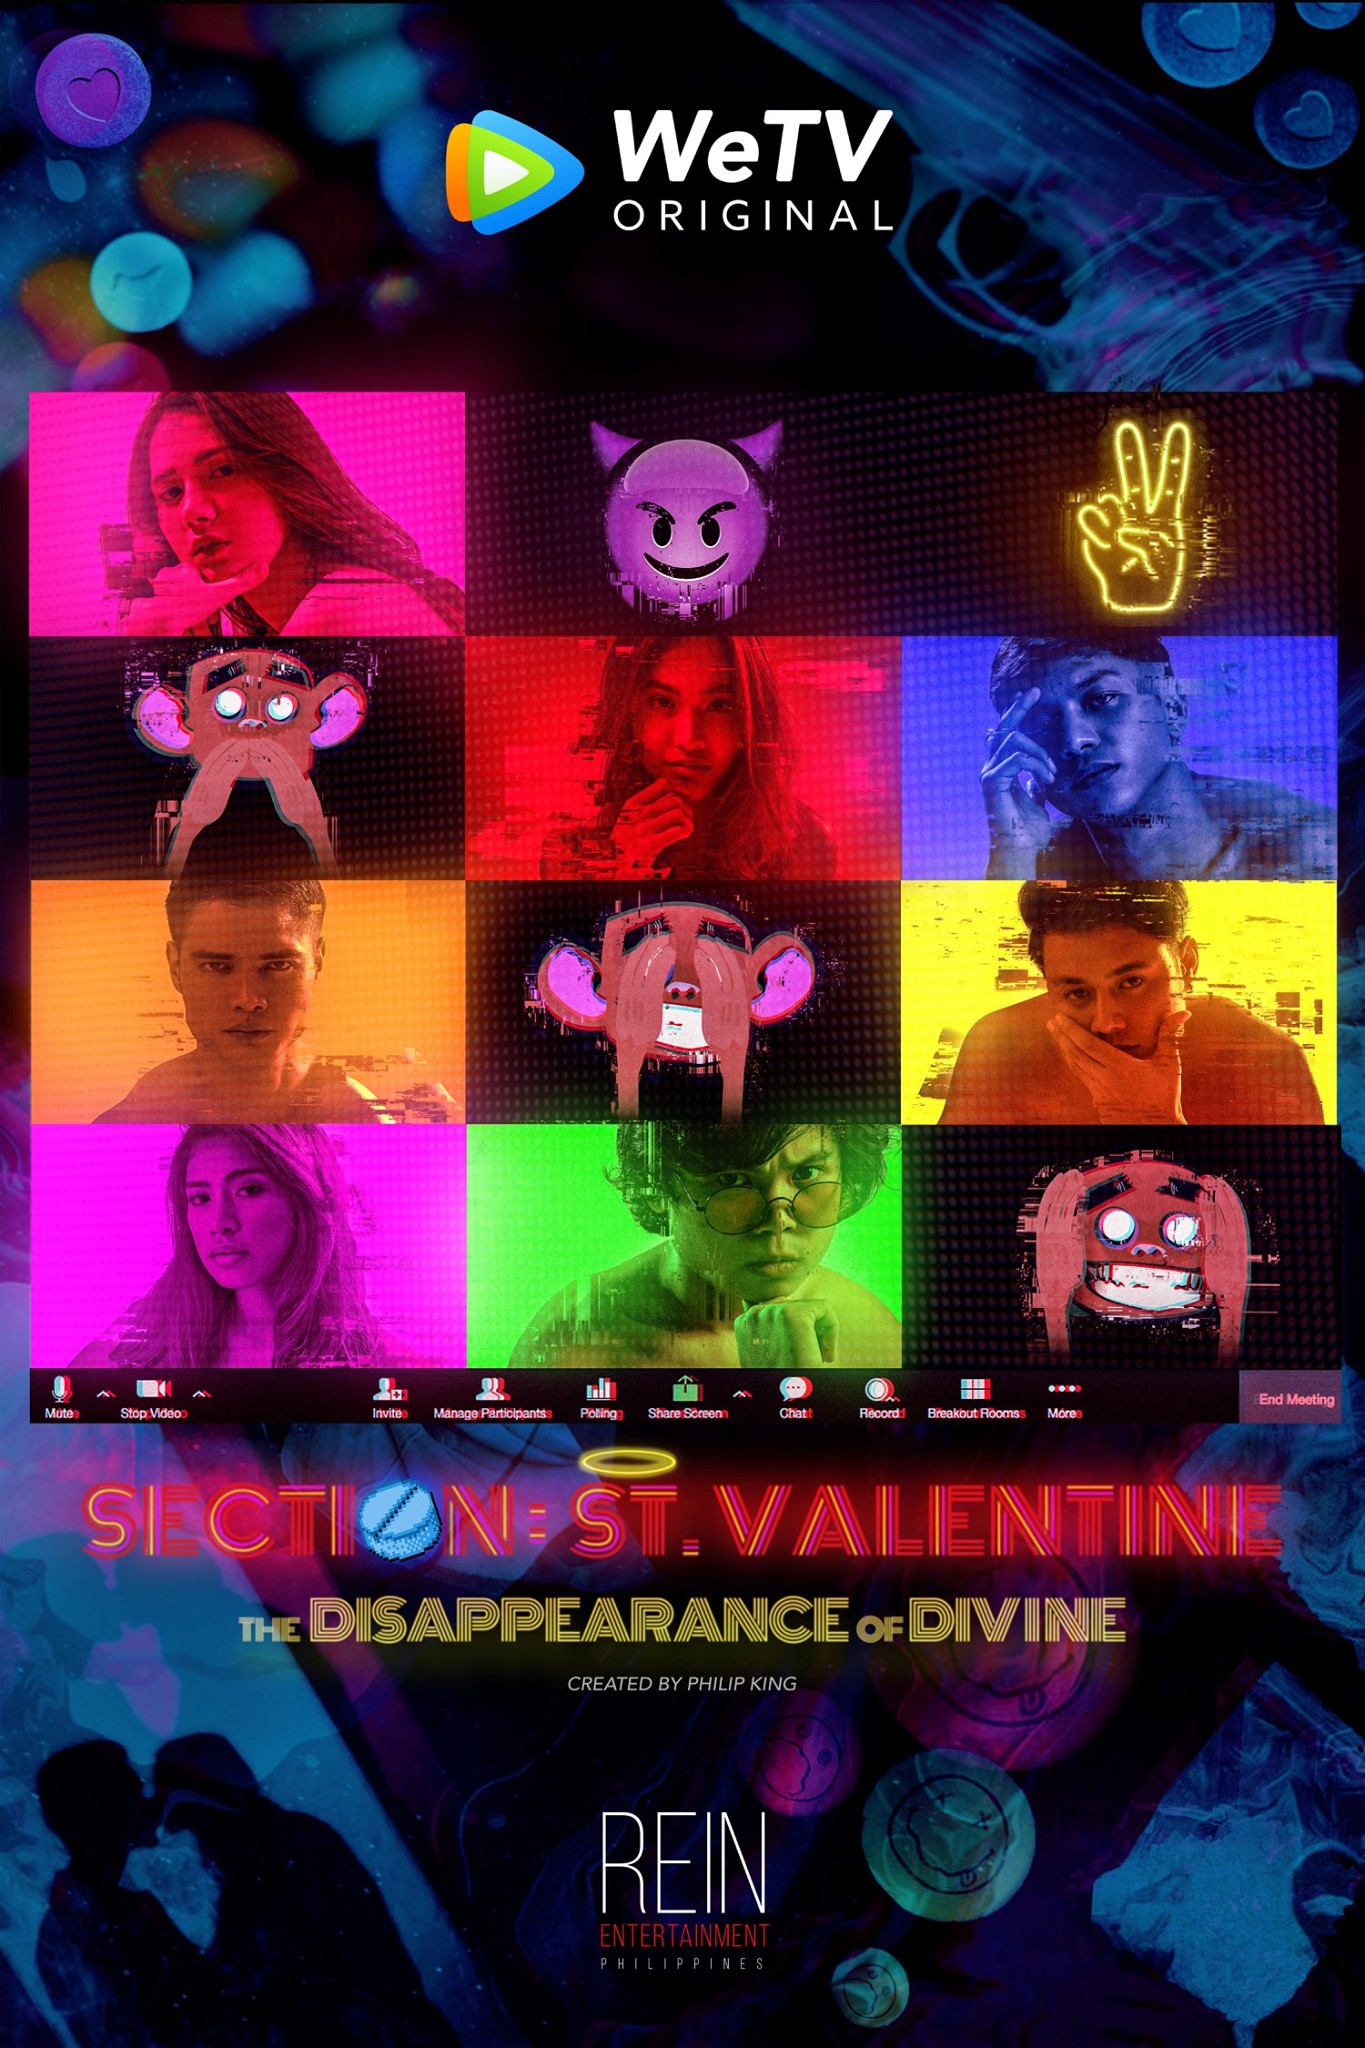 Section: St. Valentine - The Disapperance of Divine